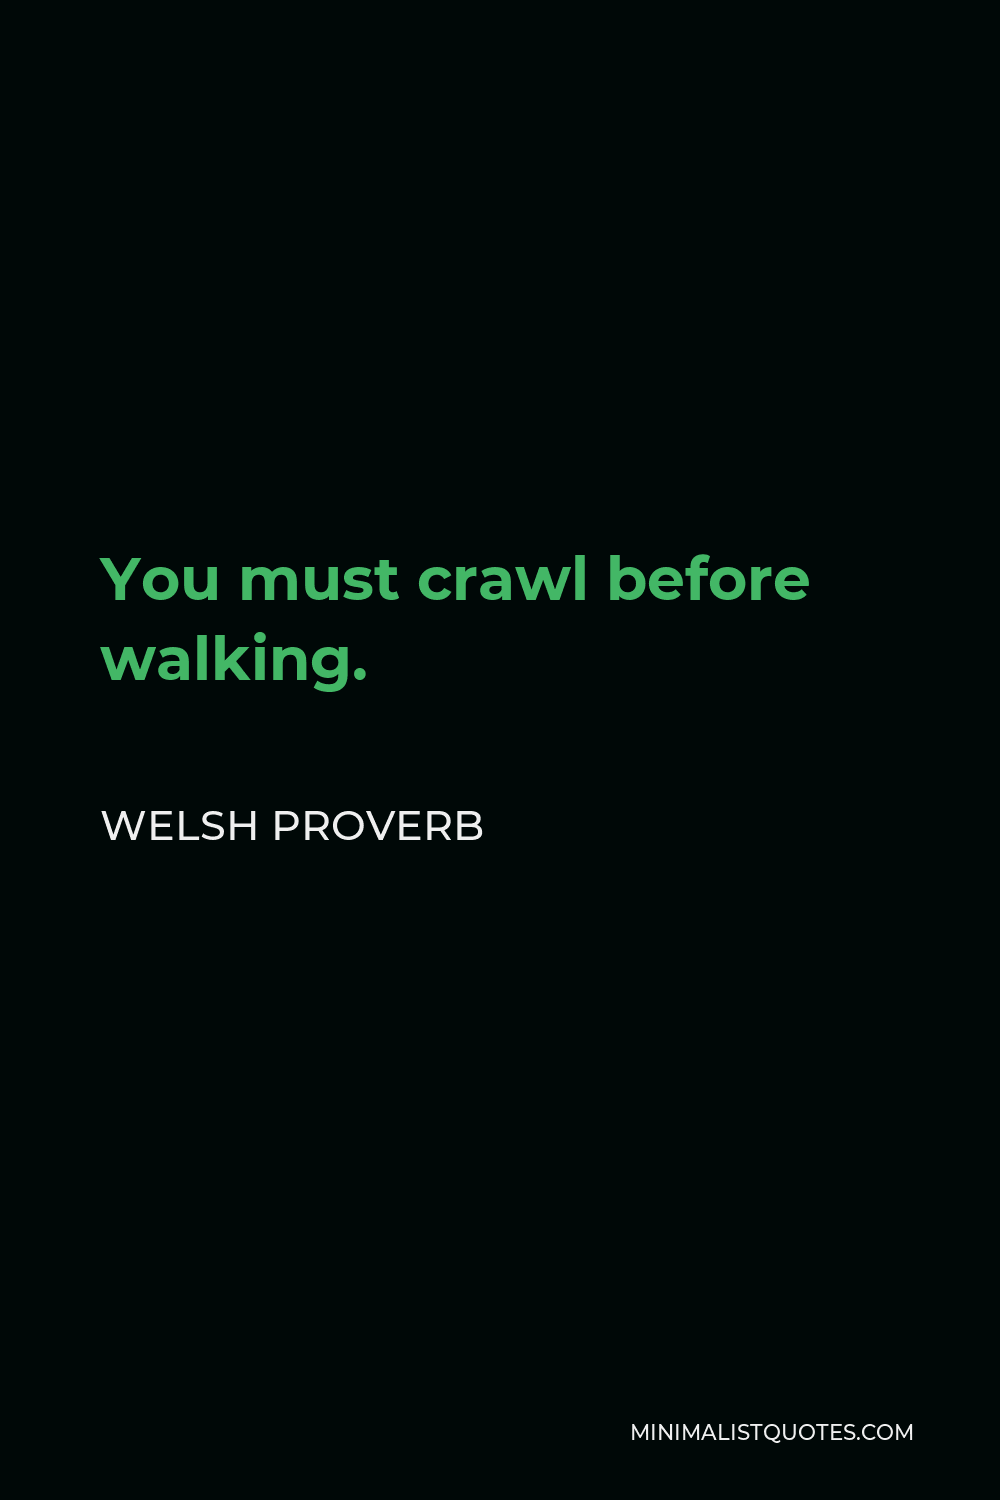 Welsh Proverb Quote - You must crawl before walking.